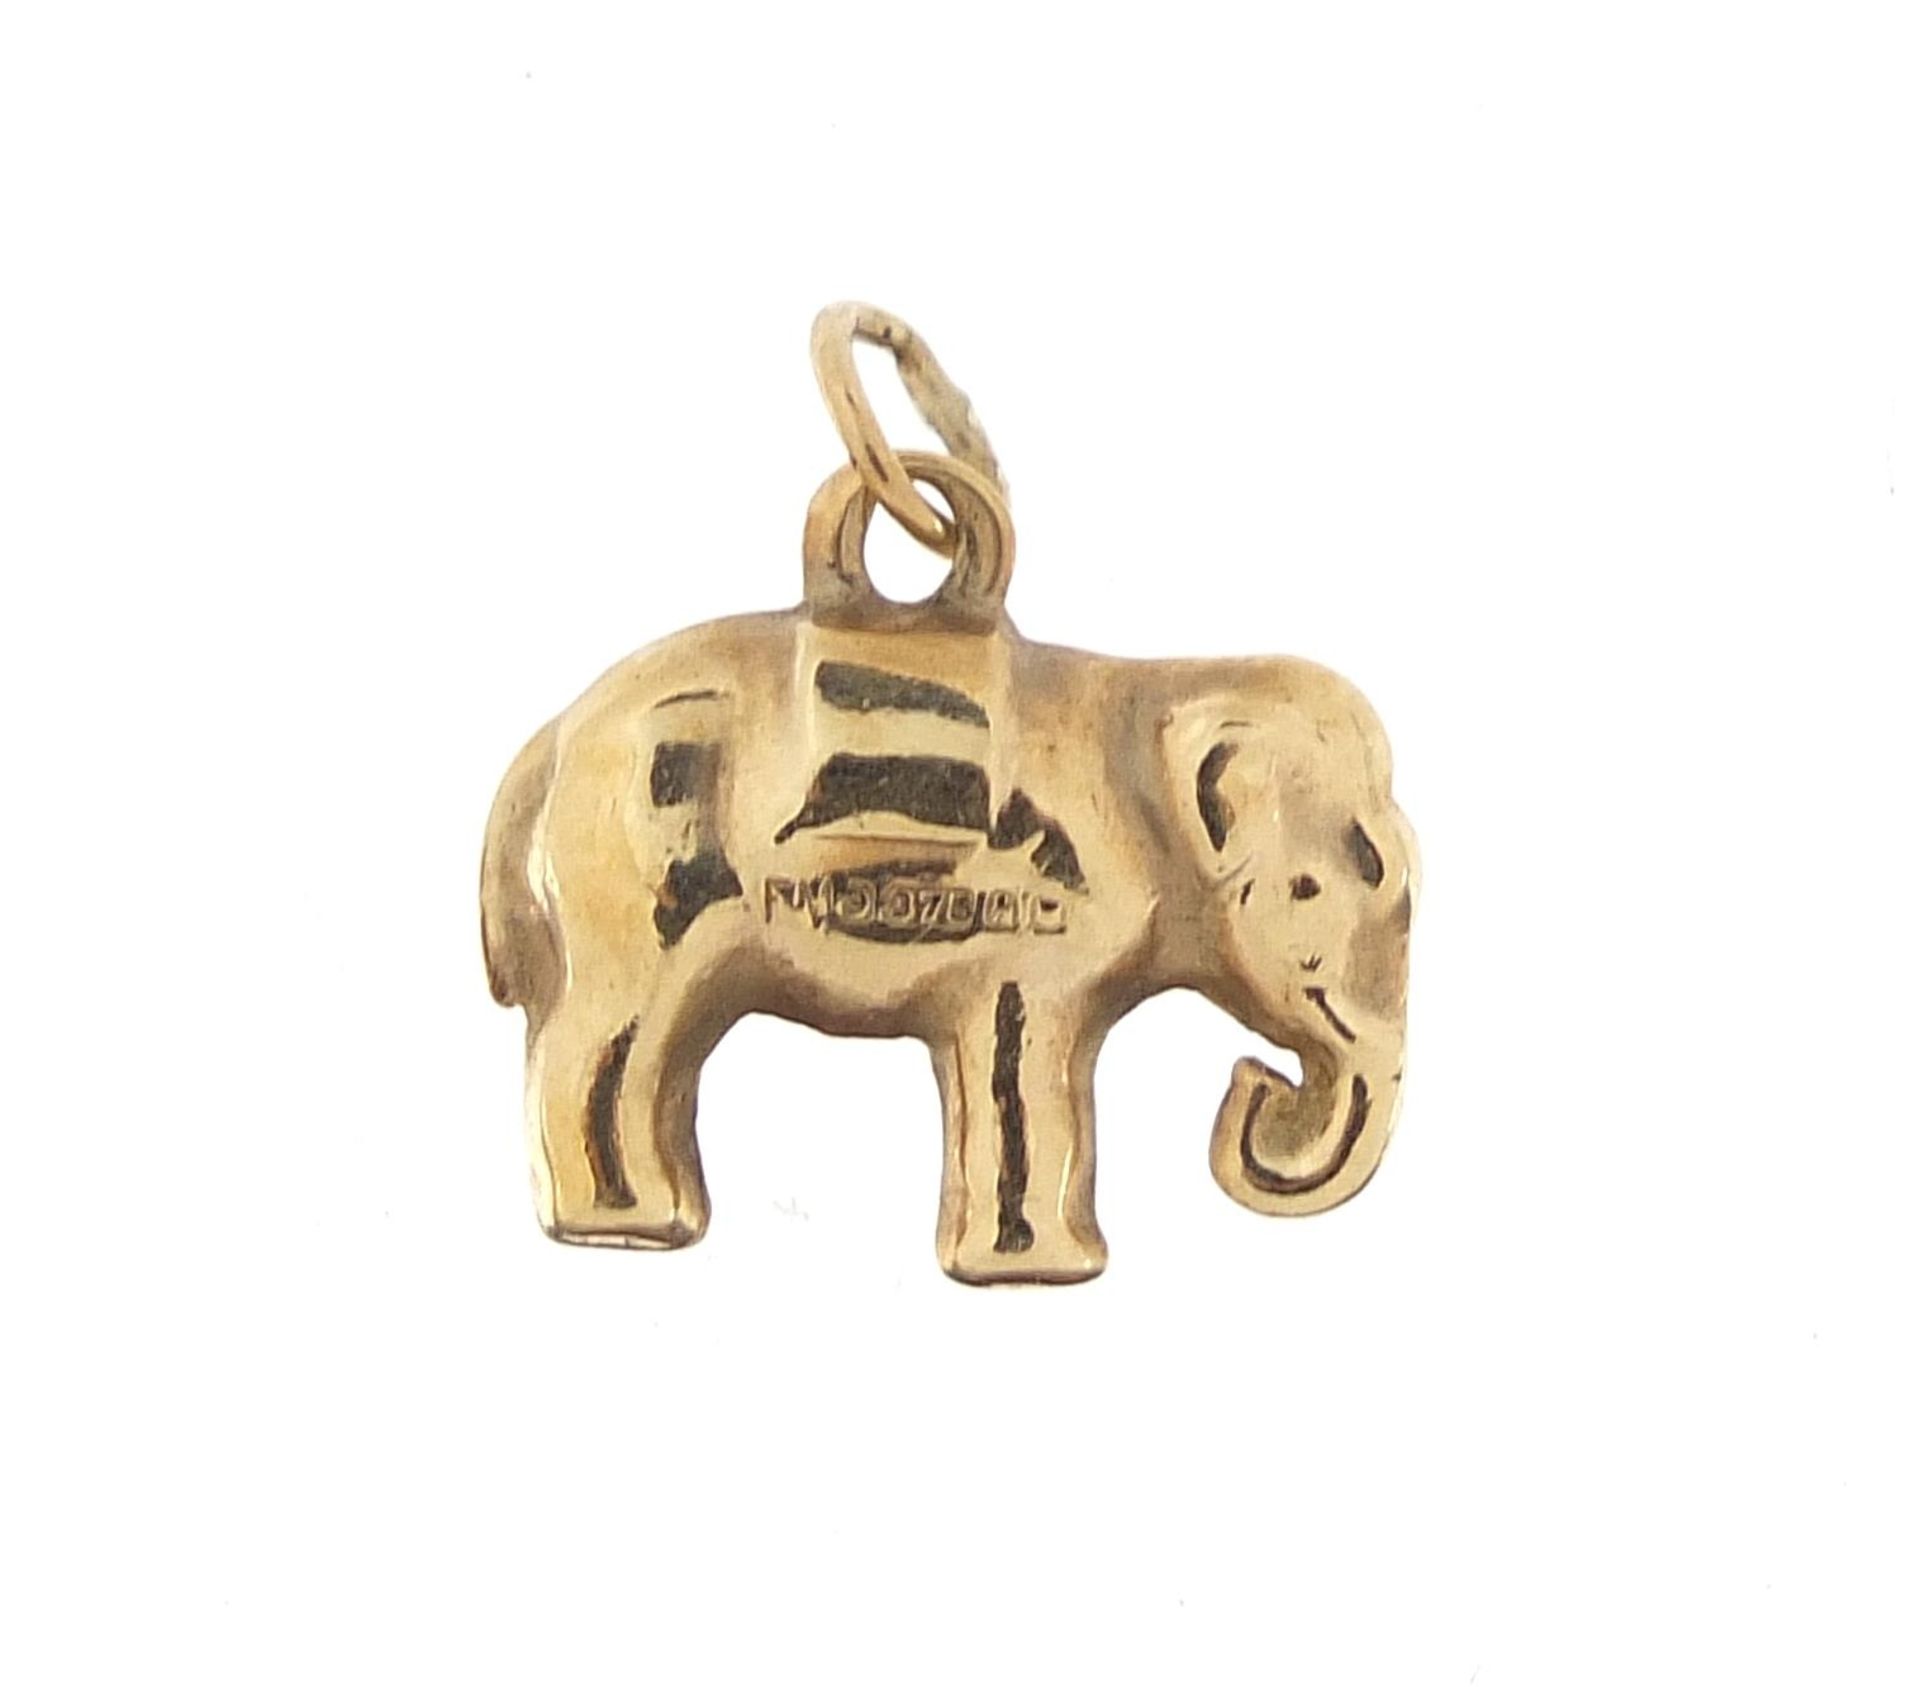 9ct gold elephant charm, 1.4cm in length, 0.7g - Image 2 of 3